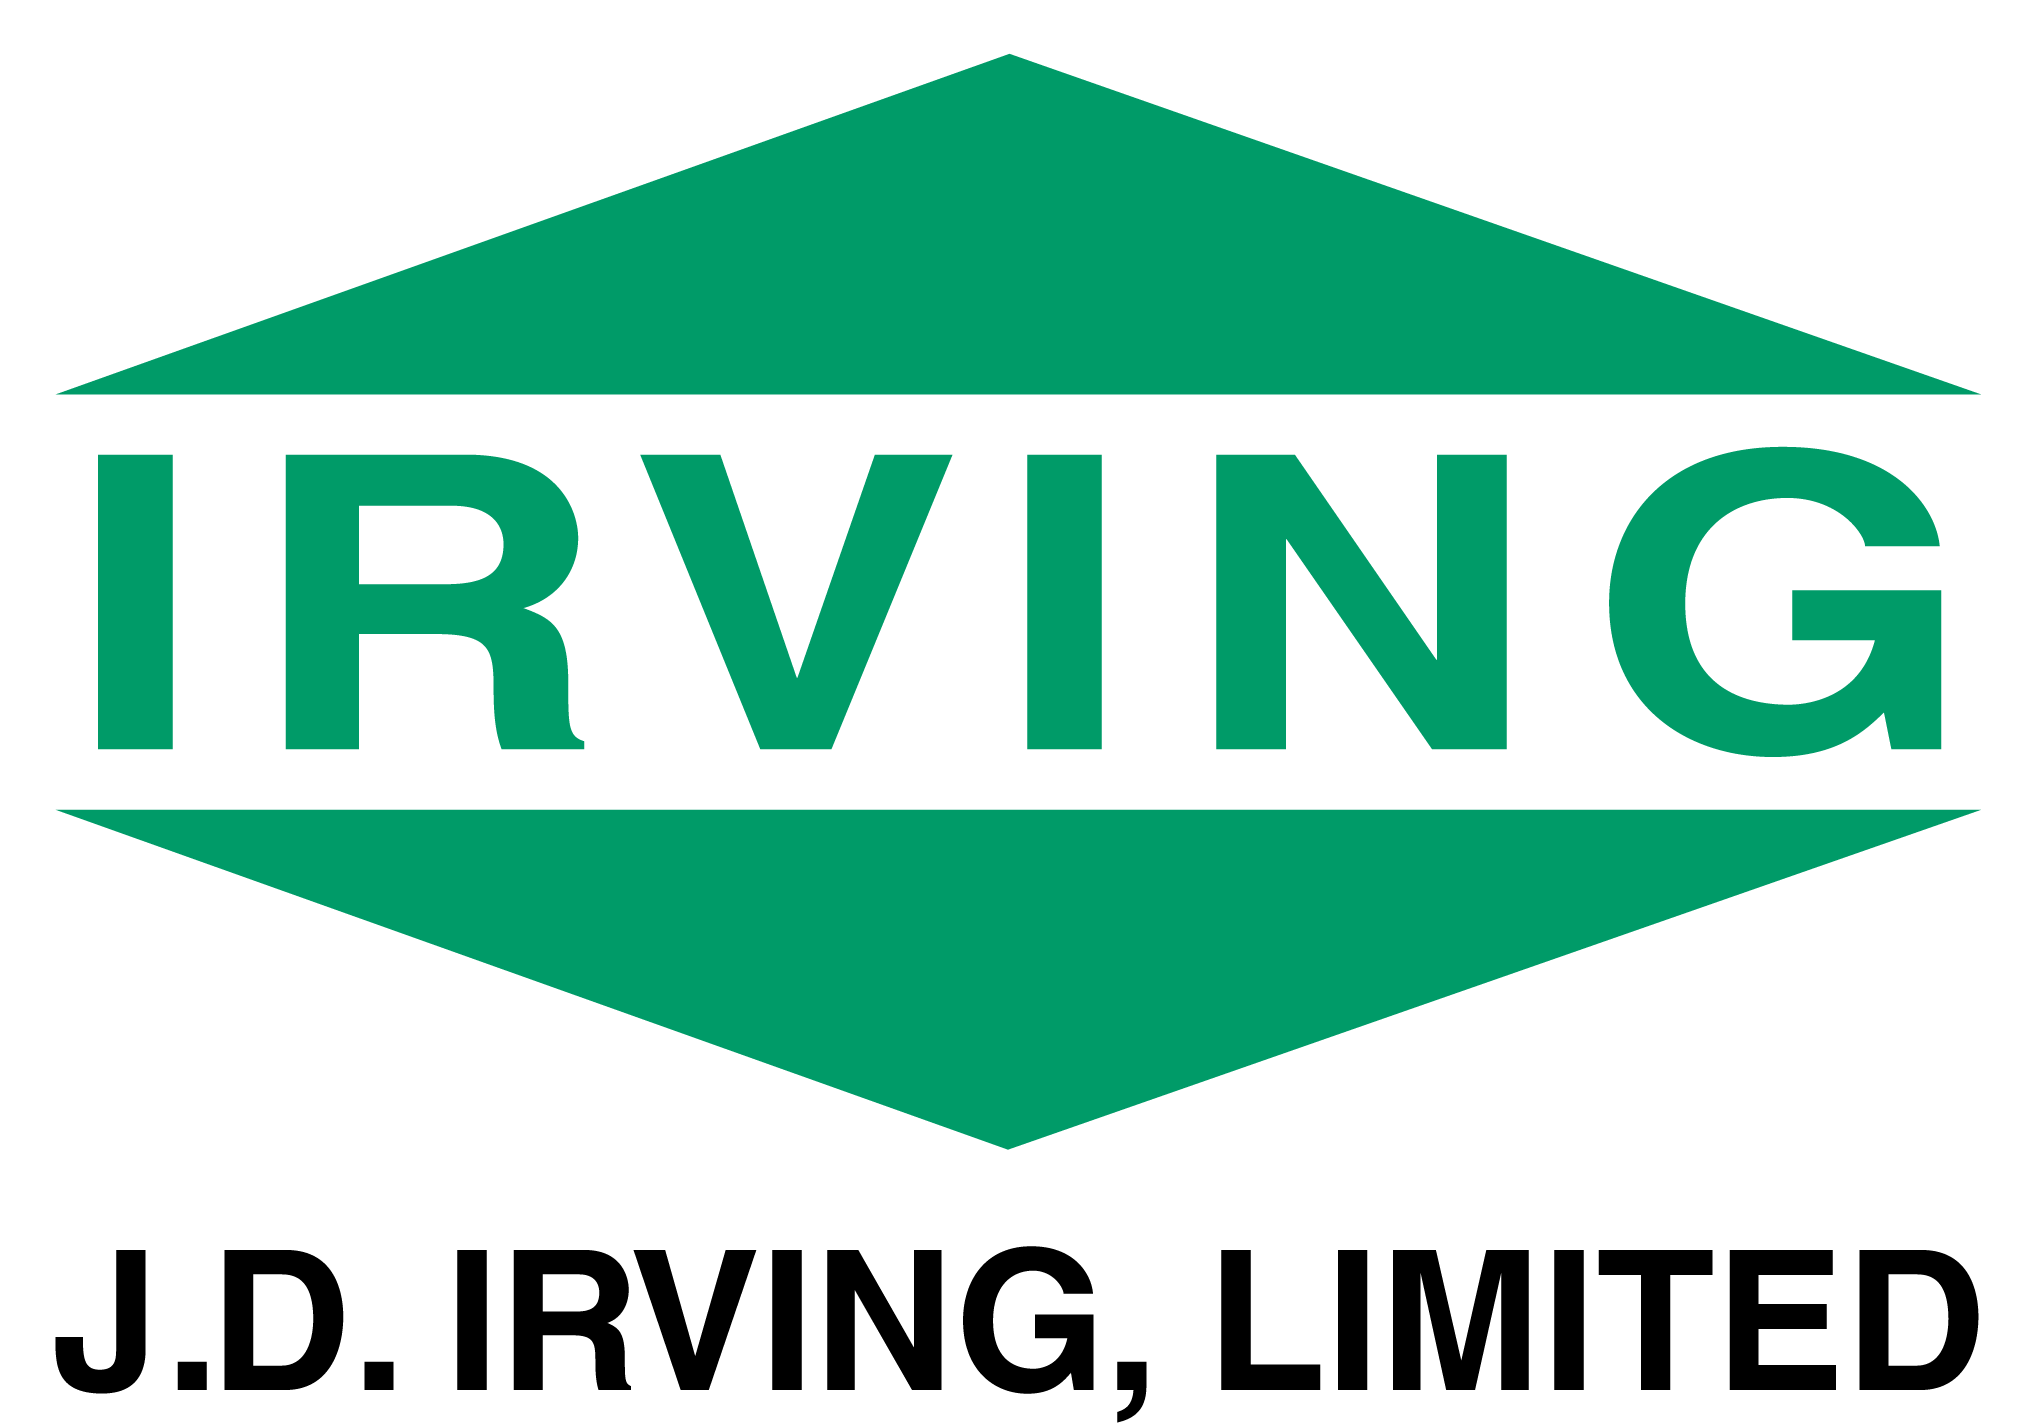 jd-irving-limited.png (2032×1423)